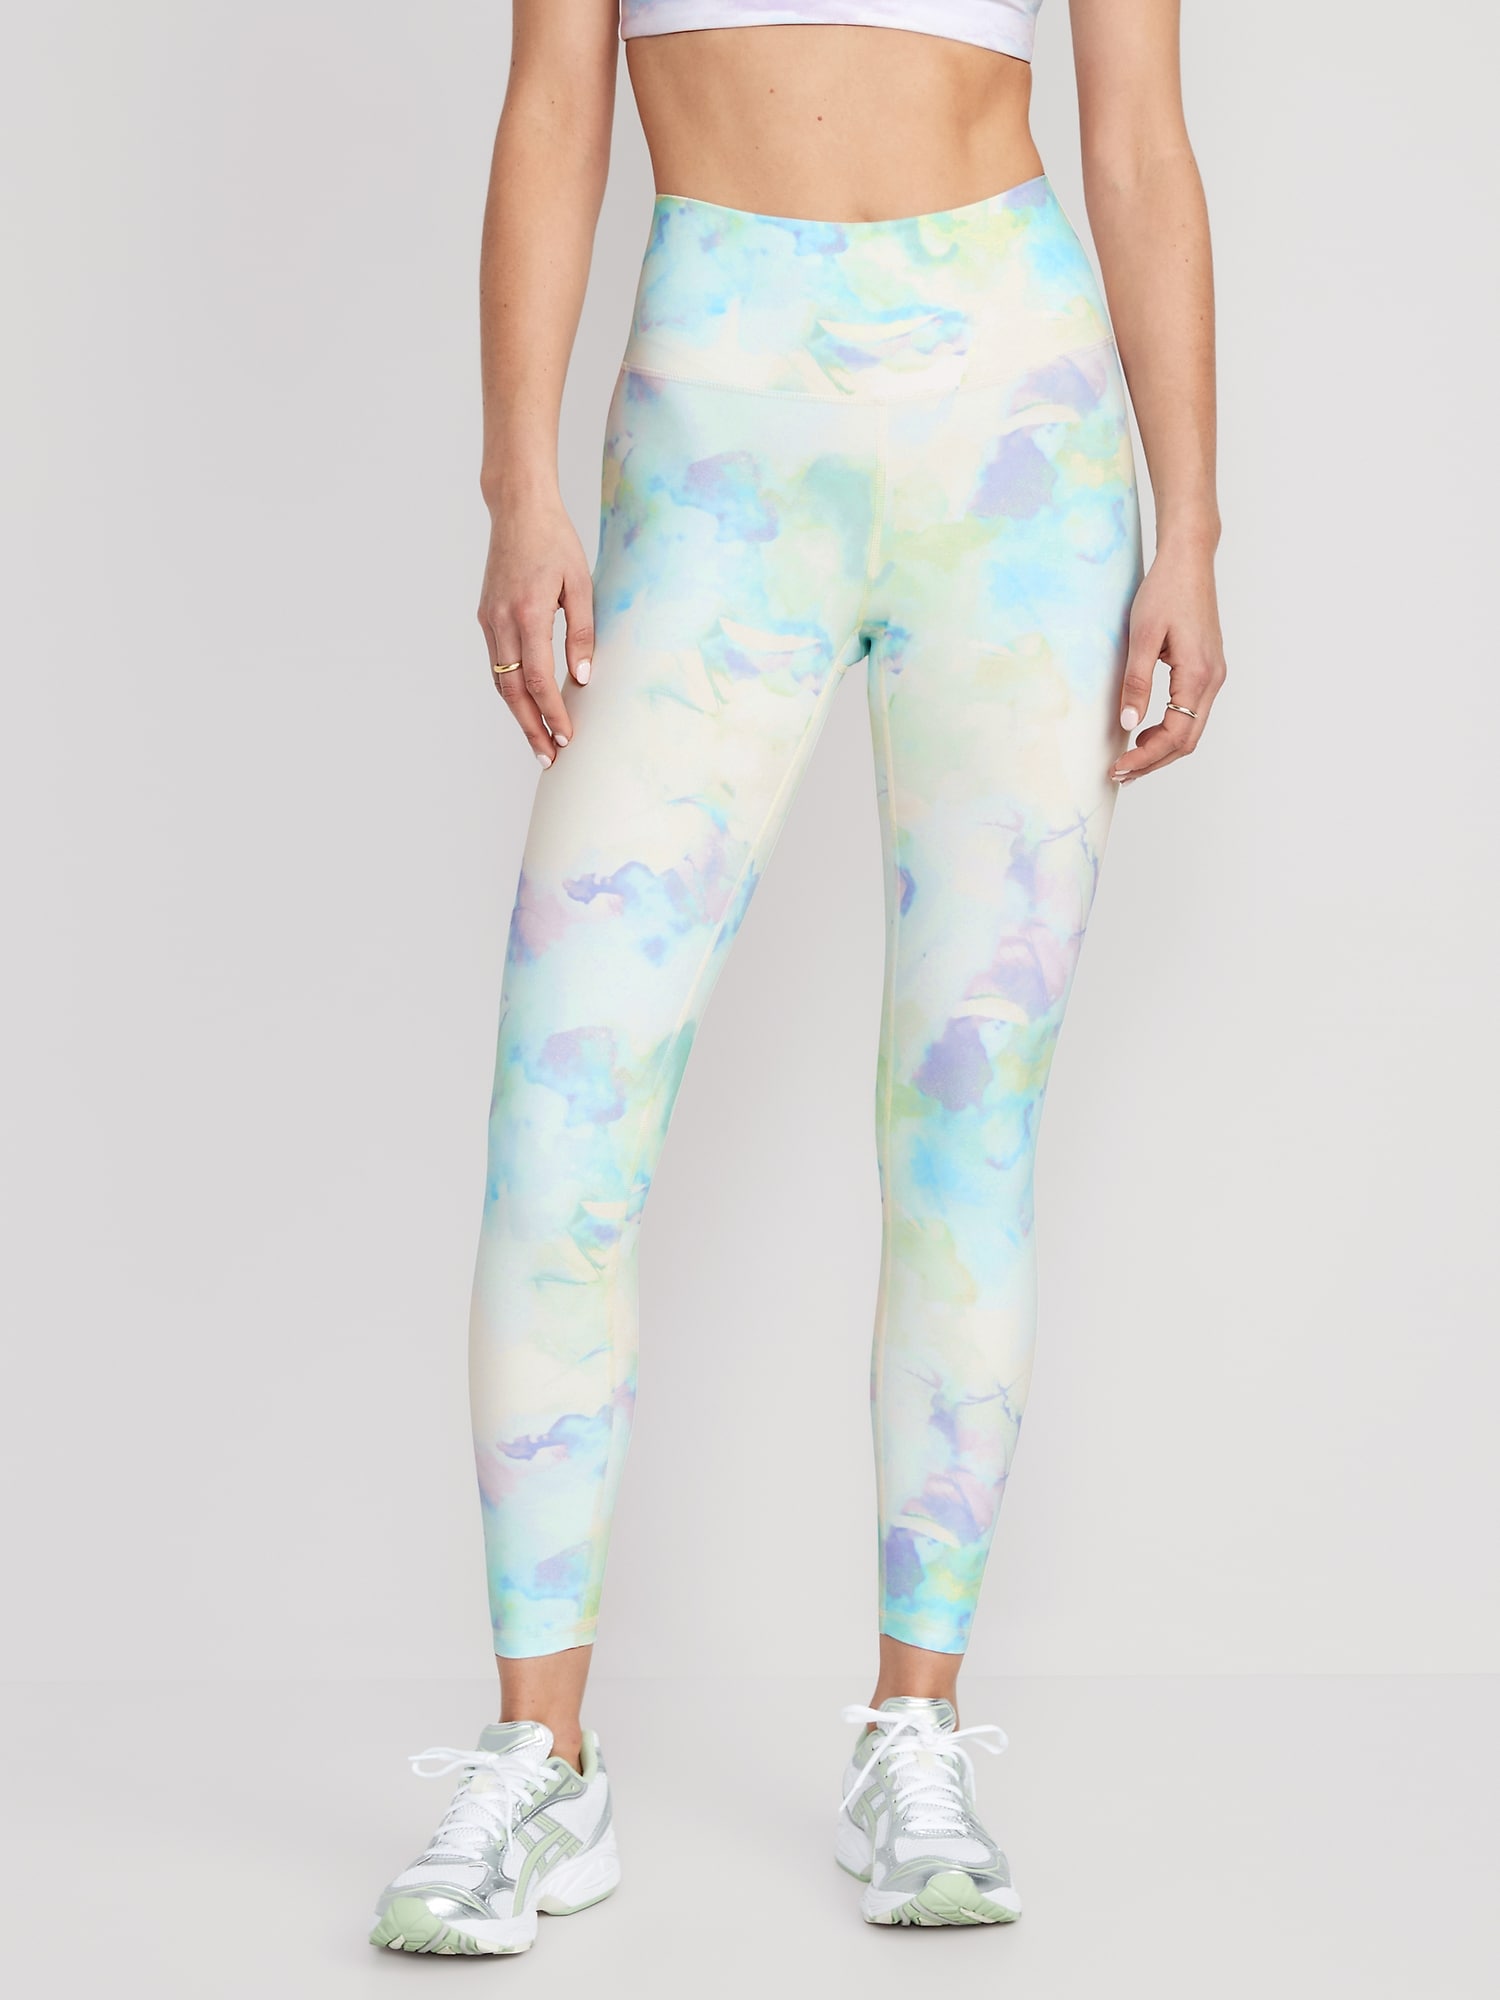 Old Navy - High-Waisted PowerSoft Crop Leggings for Women blue